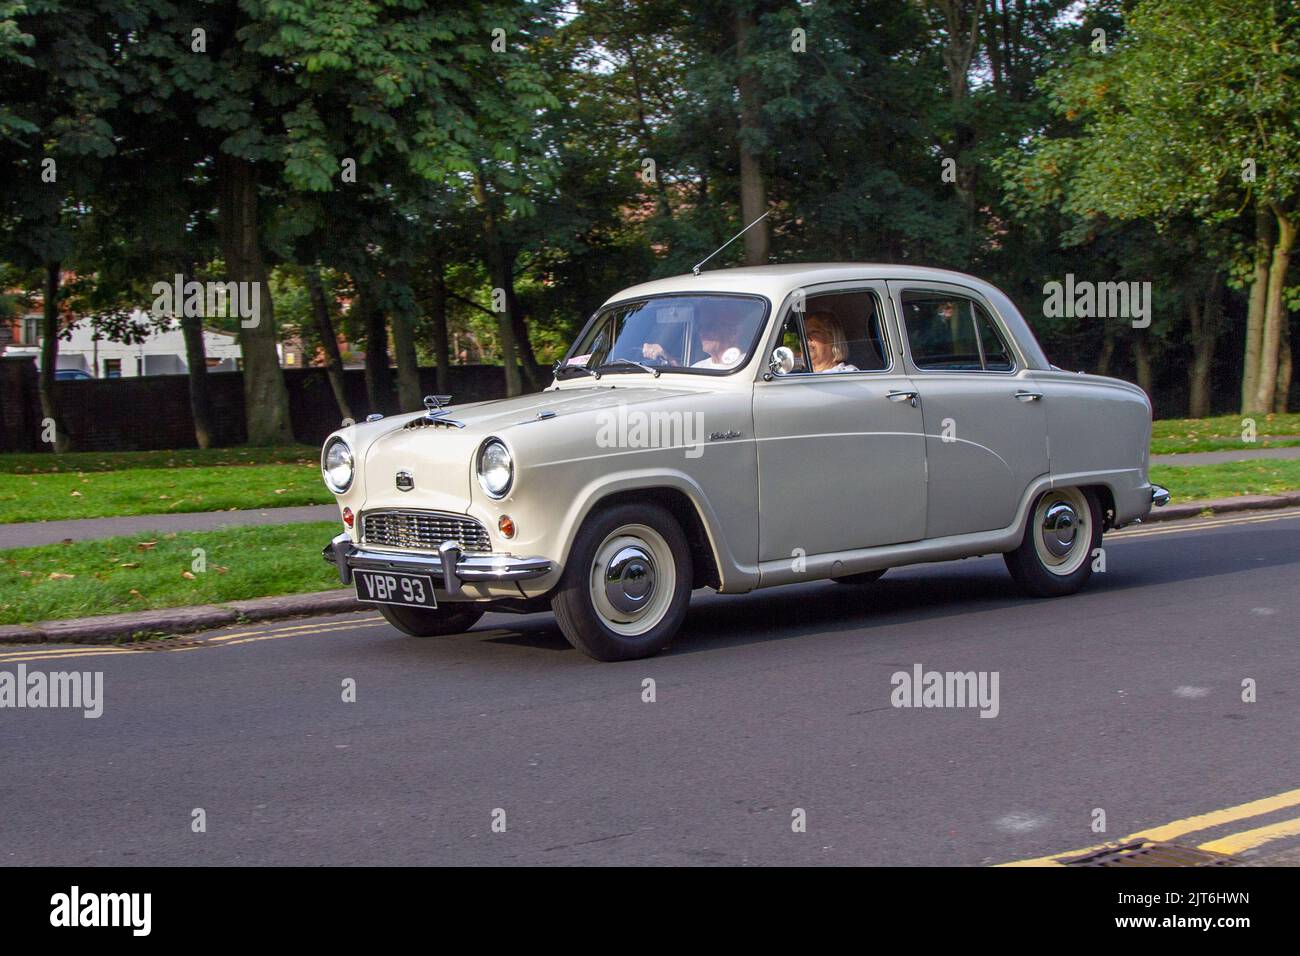 1956 50s fifties Grey AUSTIN A50 CAMBRIDGE 1500cc Petrol saloon; arriving at The annual Stanley Park Classic Car Show in the Italian Gardens. Stanley Park classics yesteryear Motor Show Hosted By Blackpool Vintage Vehicle Preservation Group, UK. Stock Photo